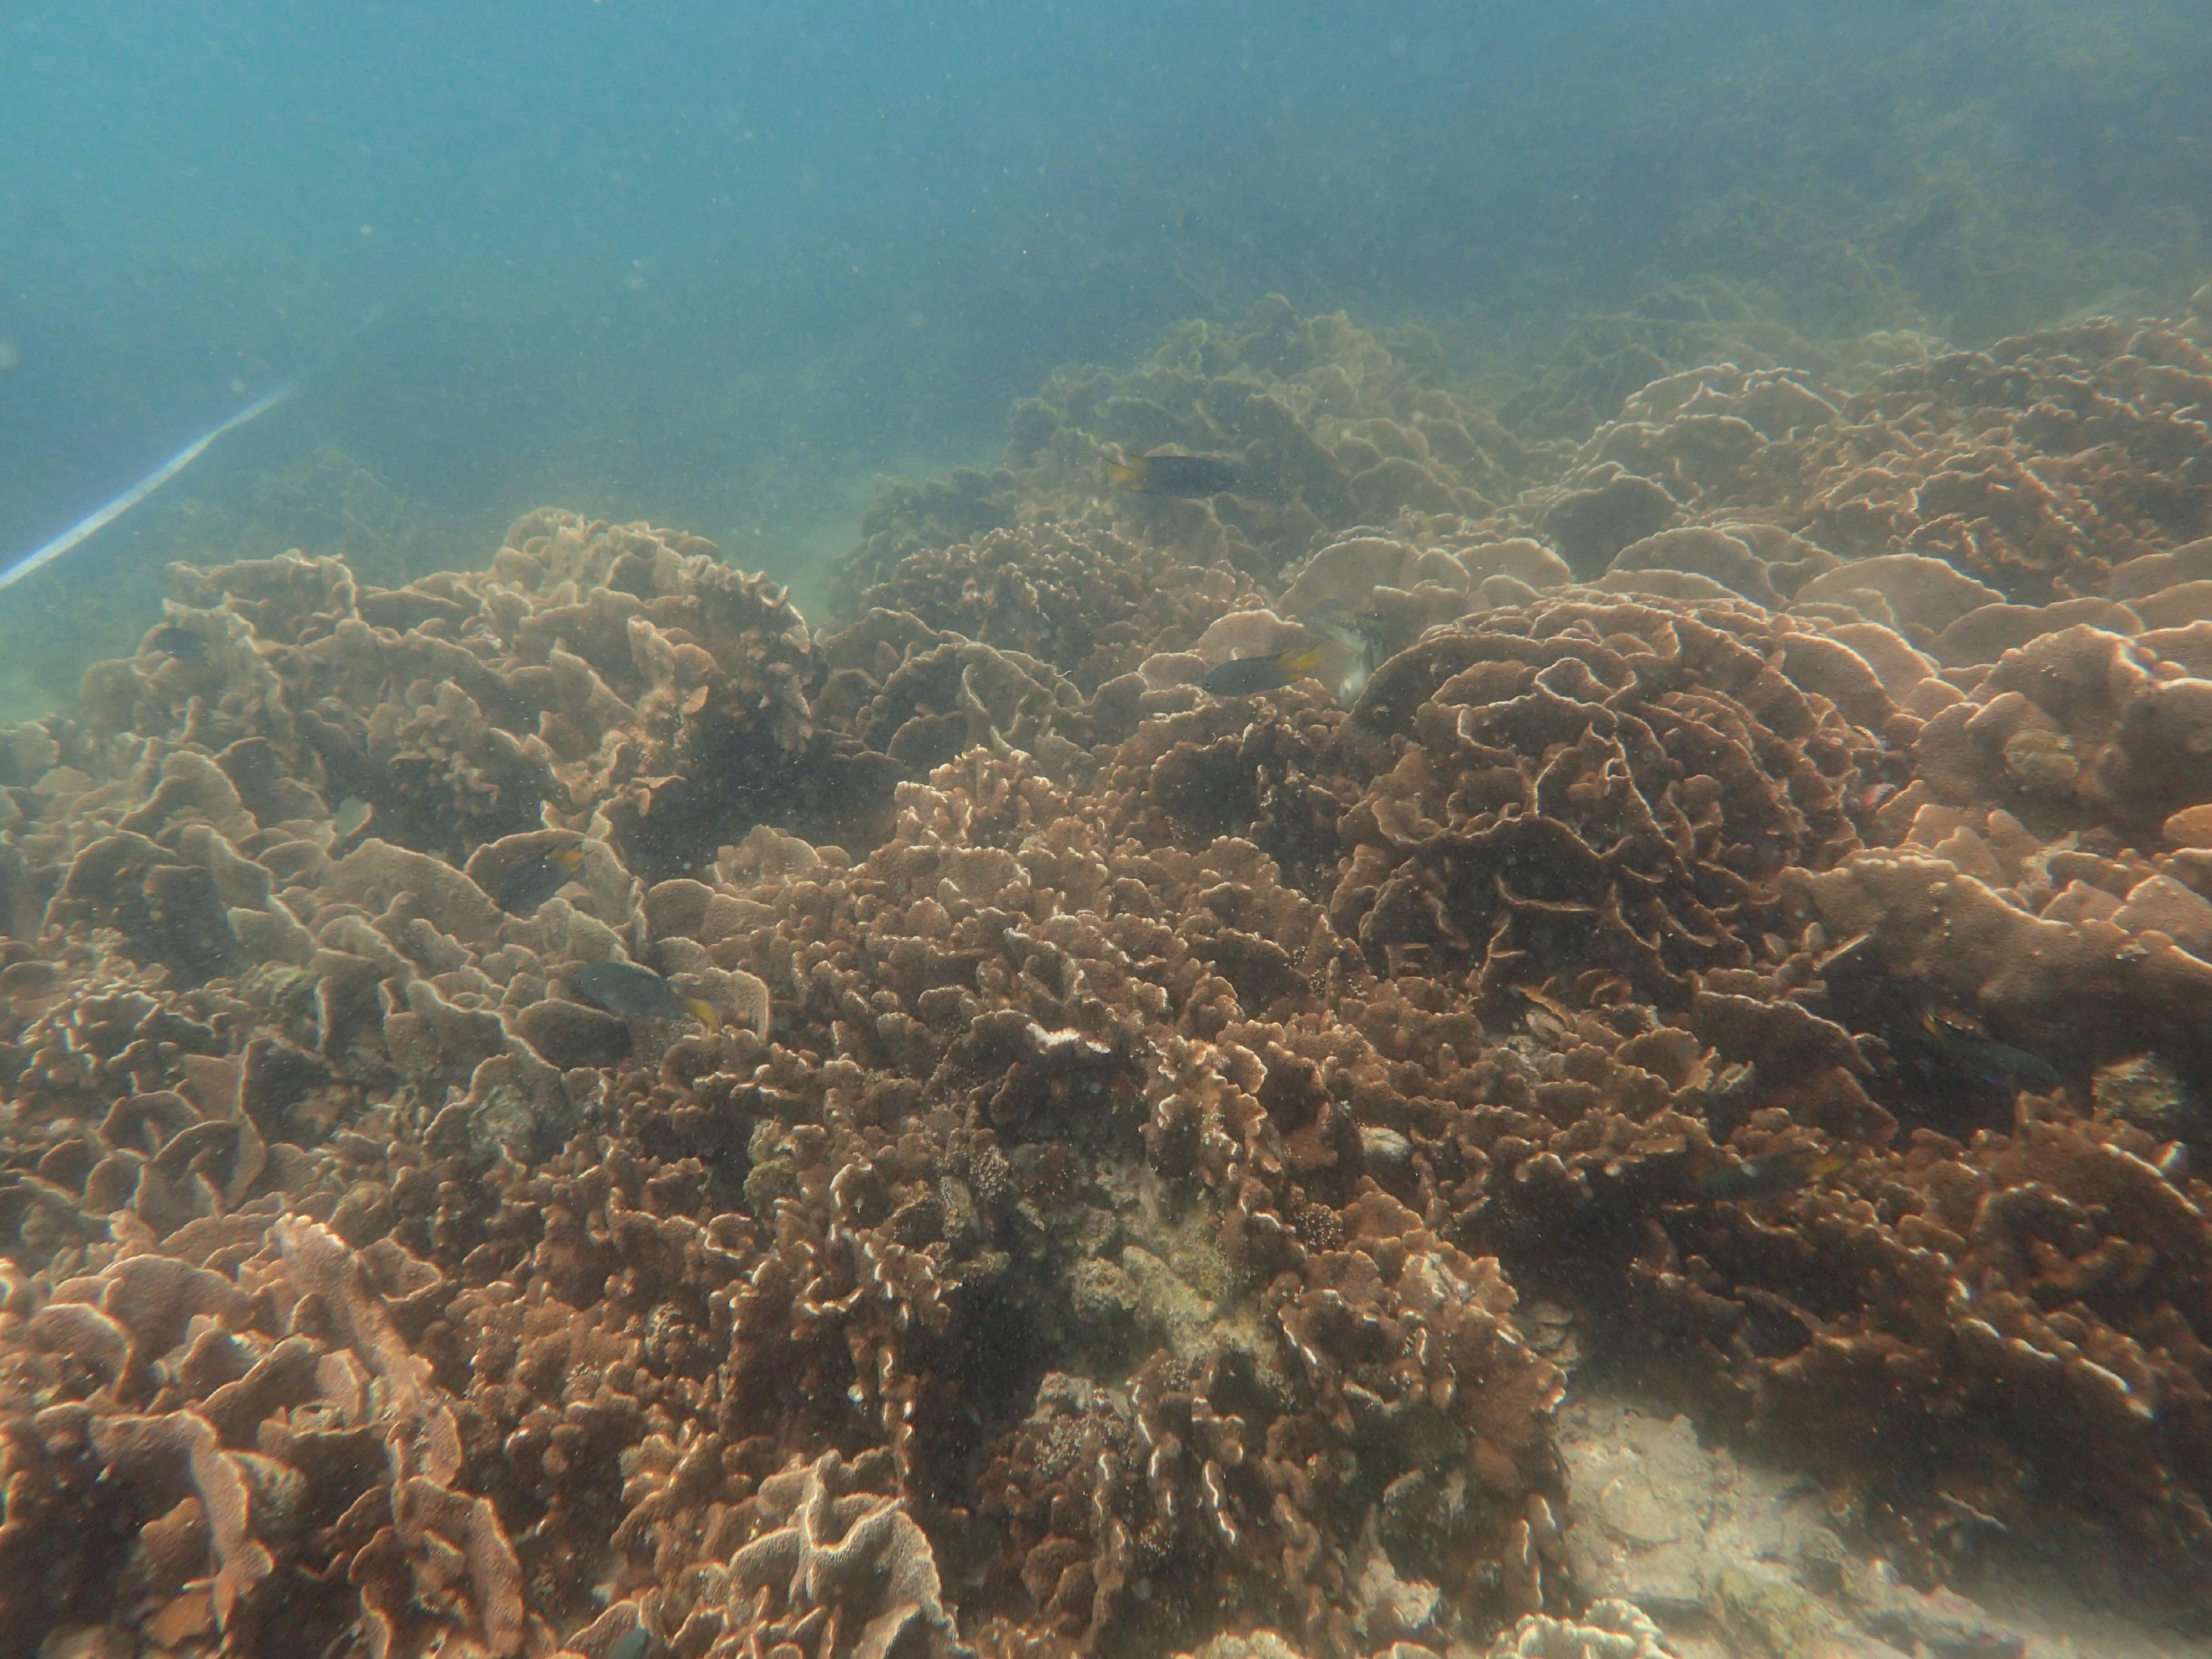 The Agriculture, Fisheries and Conservation Department announced today (December 11) that the Reef Check this year showed that local corals are generally in a healthy and stable condition and that the species diversity remains on the high side. Photo shows cactus corals at the East Dam of High Island Reservoir.